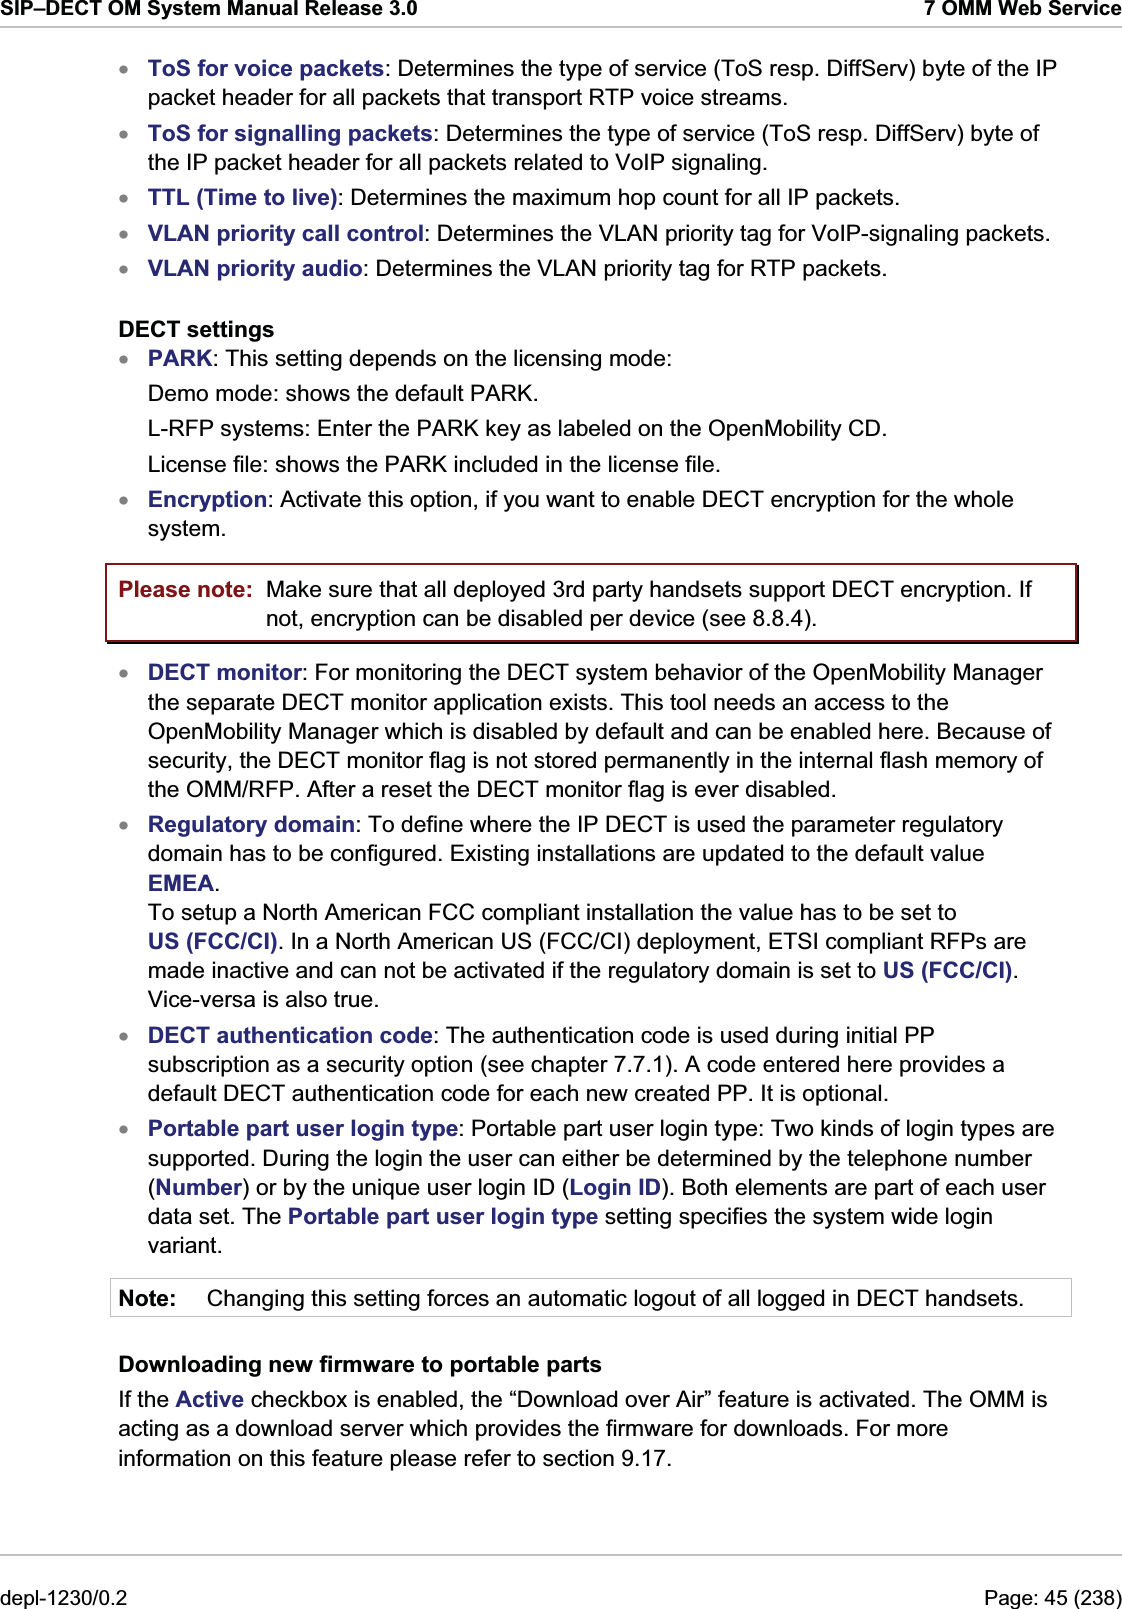 SIP–DECT OM System Manual Release 3.0  7 OMM Web Service ToS for voice packets: Determines the type of service (ToS resp. DiffServ) byte of the IP packet header for all packets that transport RTP voice streams. xxxxxxxToS for signalling packets: Determines the type of service (ToS resp. DiffServ) byte of the IP packet header for all packets related to VoIP signaling. TTL (Time to live): Determines the maximum hop count for all IP packets. VLAN priority call control: Determines the VLAN priority tag for VoIP-signaling packets. VLAN priority audio: Determines the VLAN priority tag for RTP packets. DECT settings PARK: This setting depends on the licensing mode:  Demo mode: shows the default PARK. L-RFP systems: Enter the PARK key as labeled on the OpenMobility CD. License file: shows the PARK included in the license file. Encryption: Activate this option, if you want to enable DECT encryption for the whole system. Please note:  Make sure that all deployed 3rd party handsets support DECT encryption. If not, encryption can be disabled per device (see 8.8.4). xxxxNote: DECT monitor: For monitoring the DECT system behavior of the OpenMobility Manager the separate DECT monitor application exists. This tool needs an access to the OpenMobility Manager which is disabled by default and can be enabled here. Because of security, the DECT monitor flag is not stored permanently in the internal flash memory of the OMM/RFP. After a reset the DECT monitor flag is ever disabled. Regulatory domain: To define where the IP DECT is used the parameter regulatory domain has to be configured. Existing installations are updated to the default value EMEA.  To setup a North American FCC compliant installation the value has to be set to US (FCC/CI). In a North American US (FCC/CI) deployment, ETSI compliant RFPs are made inactive and can not be activated if the regulatory domain is set to US (FCC/CI). Vice-versa is also true.  DECT authentication code: The authentication code is used during initial PP subscription as a security option (see chapter 7.7.1). A code entered here provides a default DECT authentication code for each new created PP. It is optional.  Portable part user login type: Portable part user login type: Two kinds of login types are supported. During the login the user can either be determined by the telephone number (Number) or by the unique user login ID (Login ID). Both elements are part of each user data set. The Portable part user login type setting specifies the system wide login variant. Changing this setting forces an automatic logout of all logged in DECT handsets. Downloading new firmware to portable parts If the Active checkbox is enabled, the “Download over Air” feature is activated. The OMM is acting as a download server which provides the firmware for downloads. For more information on this feature please refer to section 9.17.  depl-1230/0.2  Page: 45 (238) 